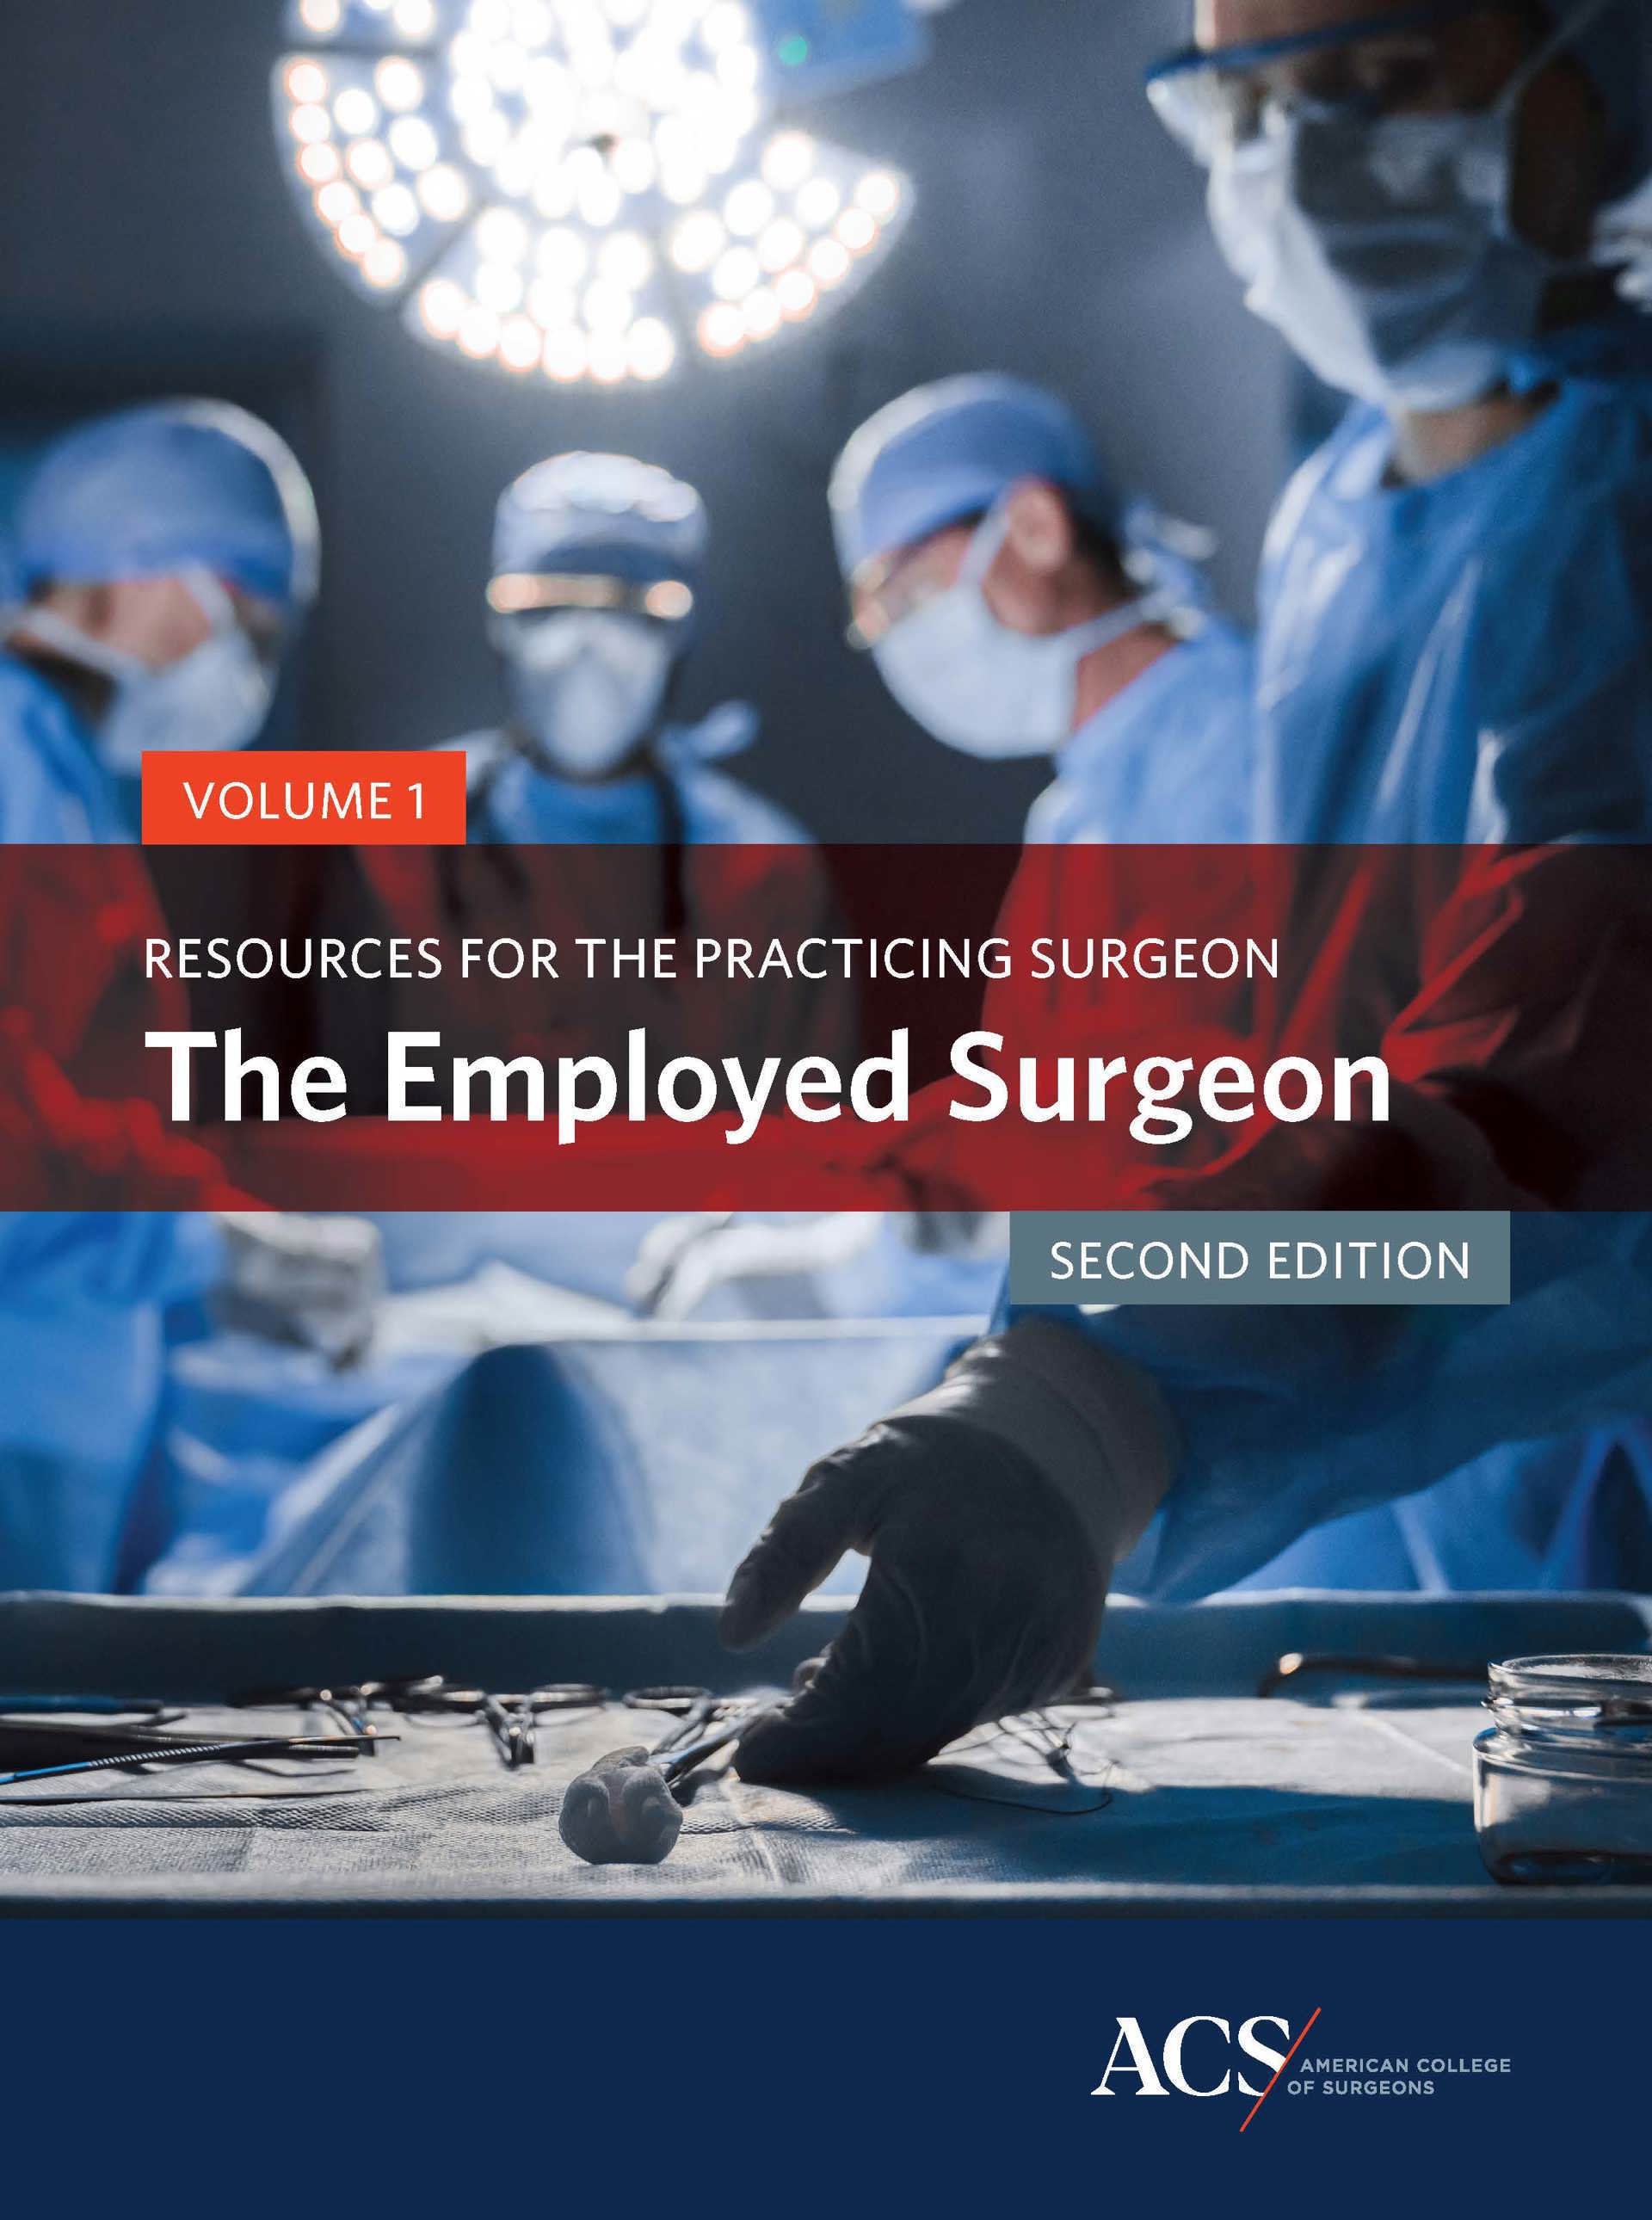 ACS Releases Updated Primer to Address Career Needs of Employed Surgeons